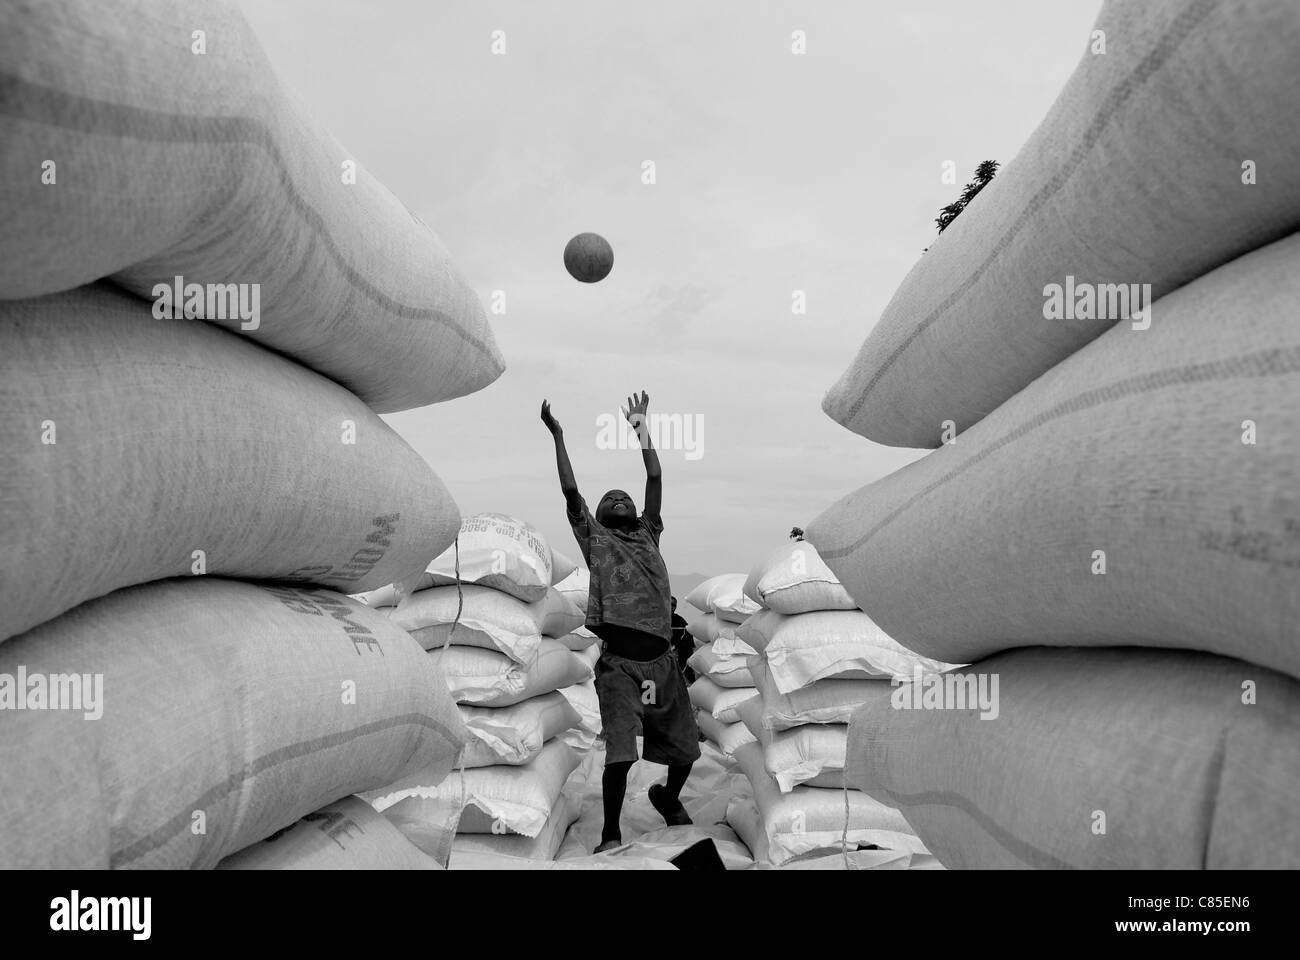 Young internally displaced boy playing happily with a football amid large sacks of basic foodstuff at World Food Programme WFP distribution point in North Kivu, DR Congo central Africa Stock Photo